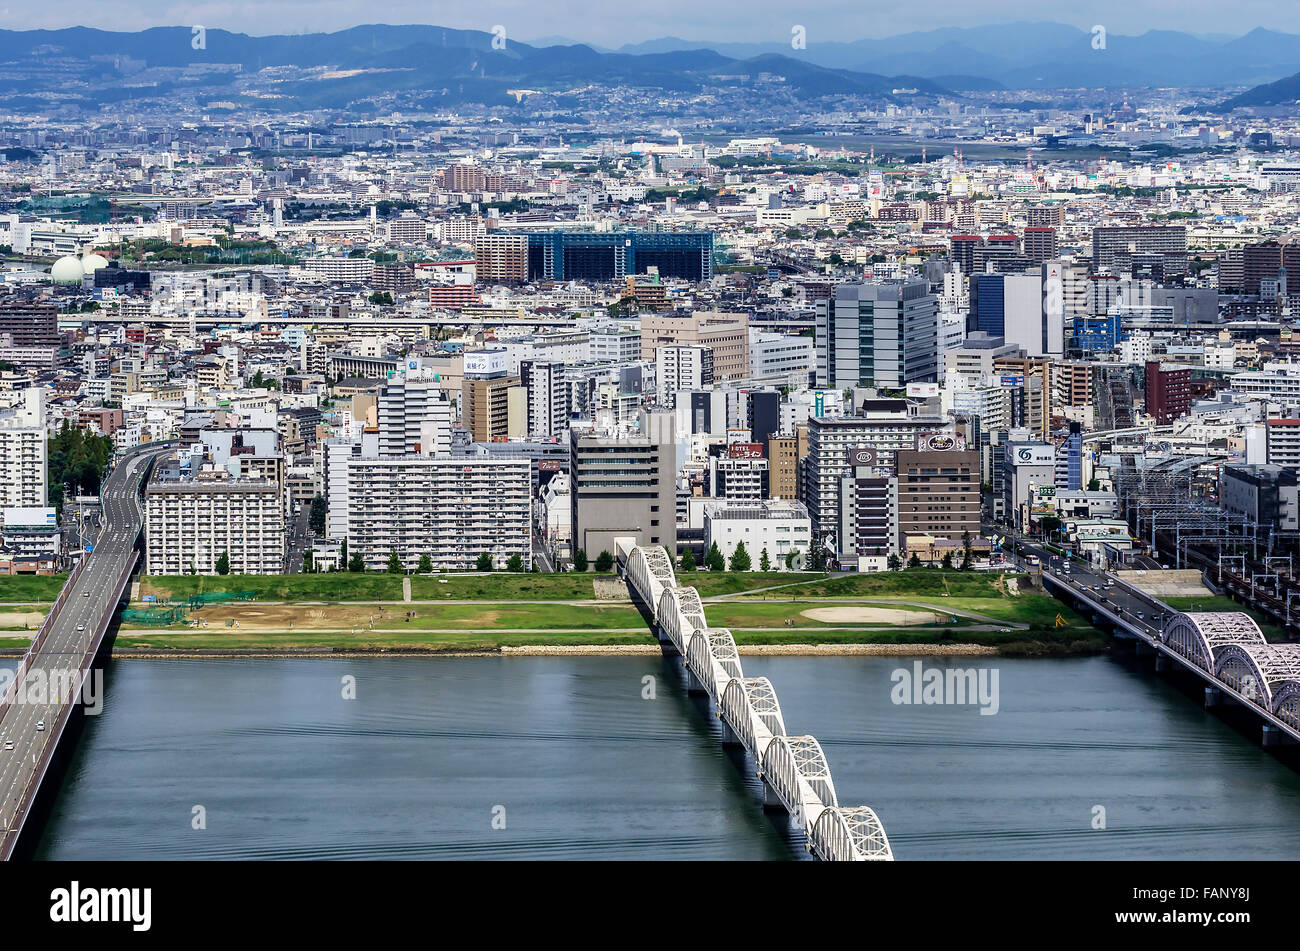 View of offices and residential buildings from Kita-ku, Osaka, Japan Stock Photo